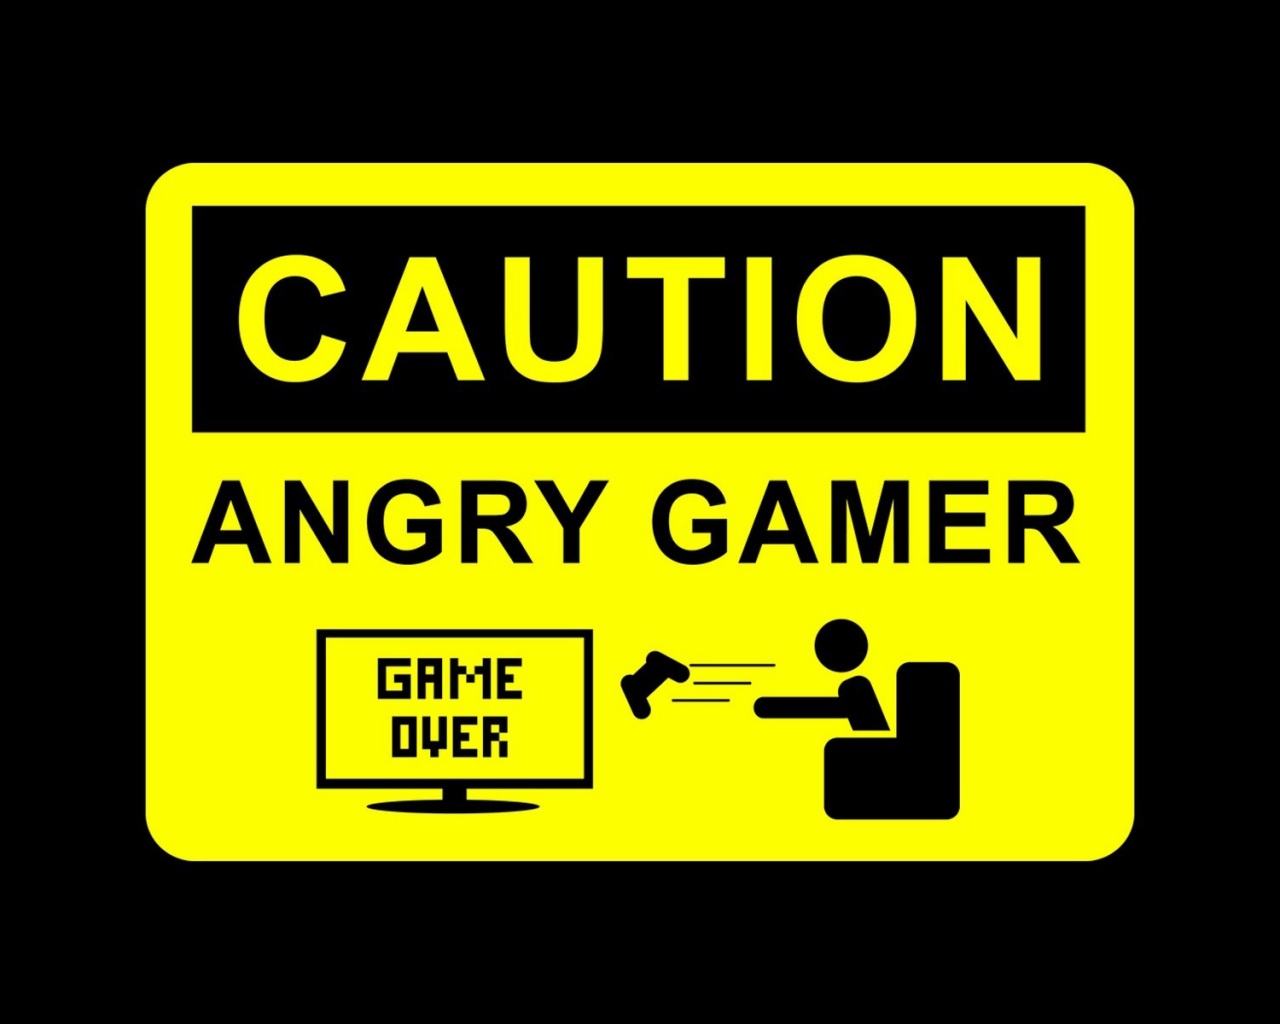 Caution angry gamer Wallpaper in 1280x1024 5:4